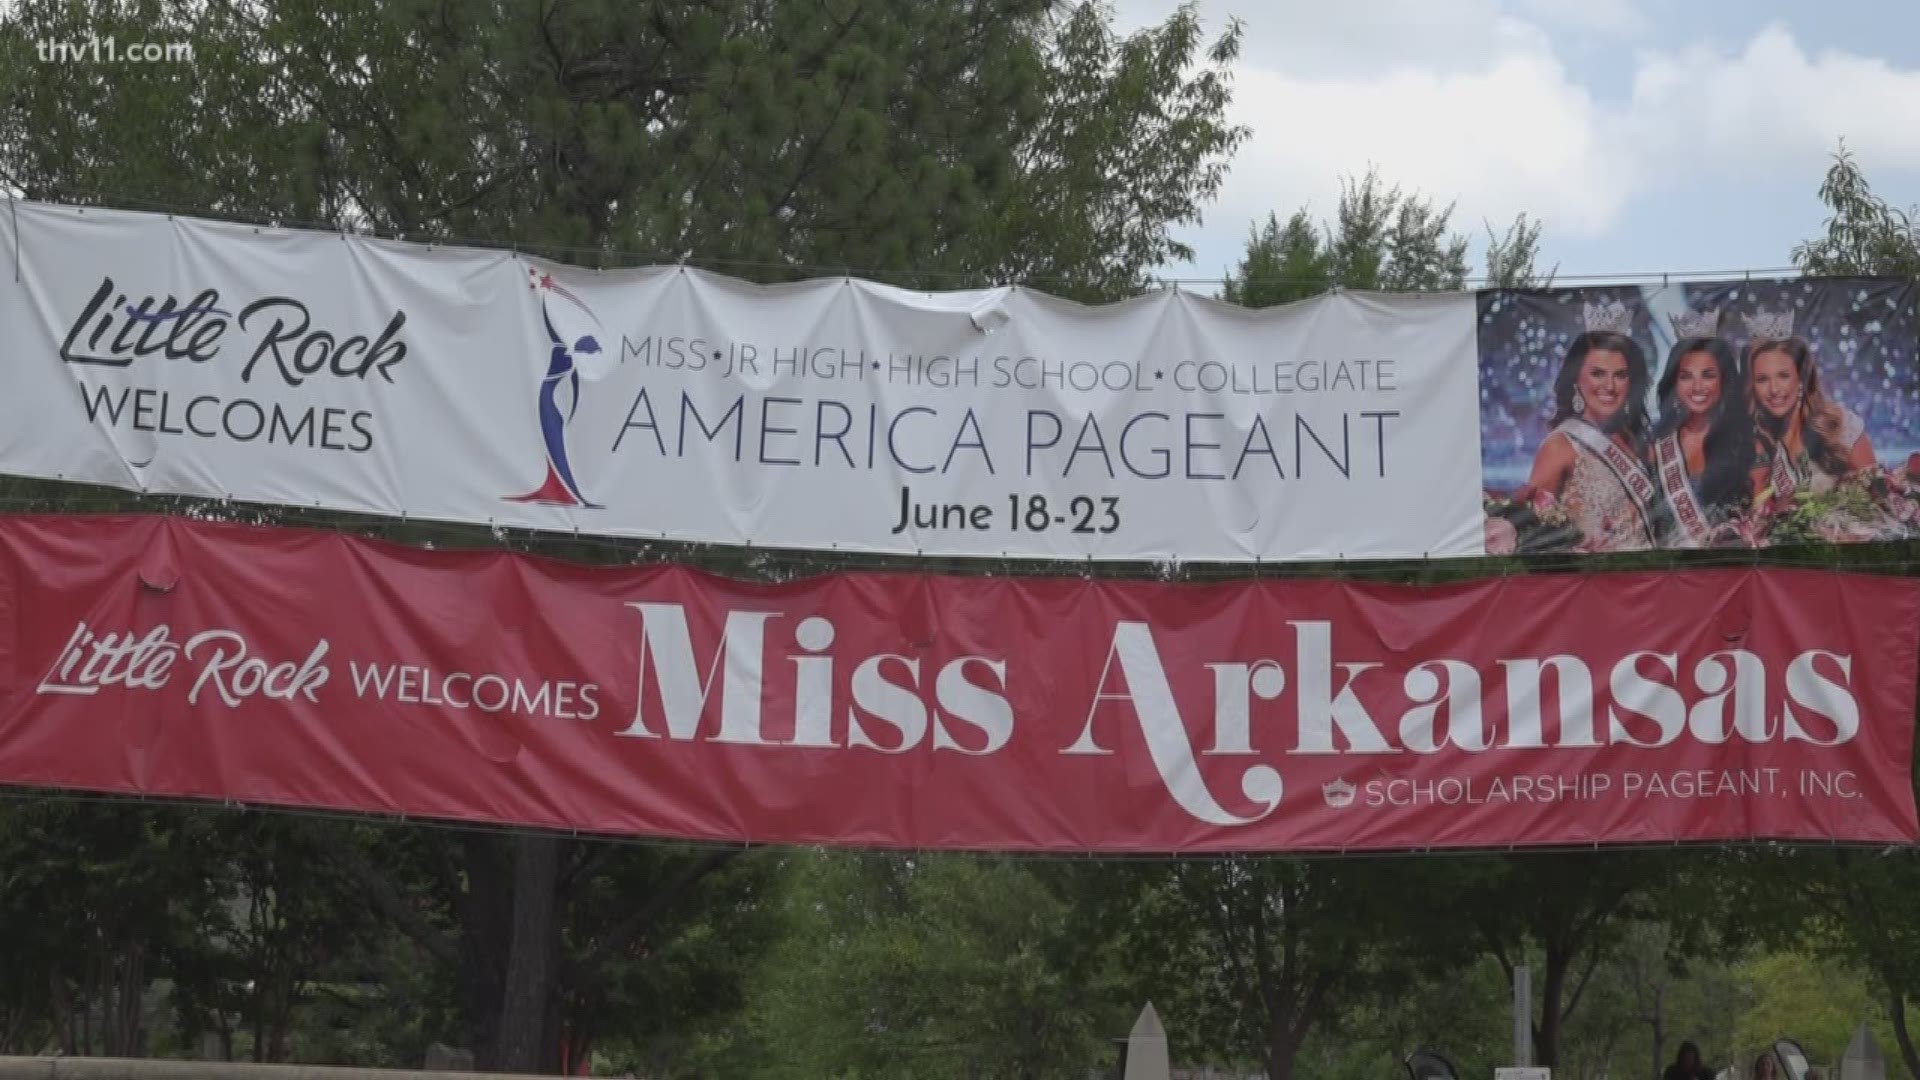 Back to back pageants bring the money to Little Rock